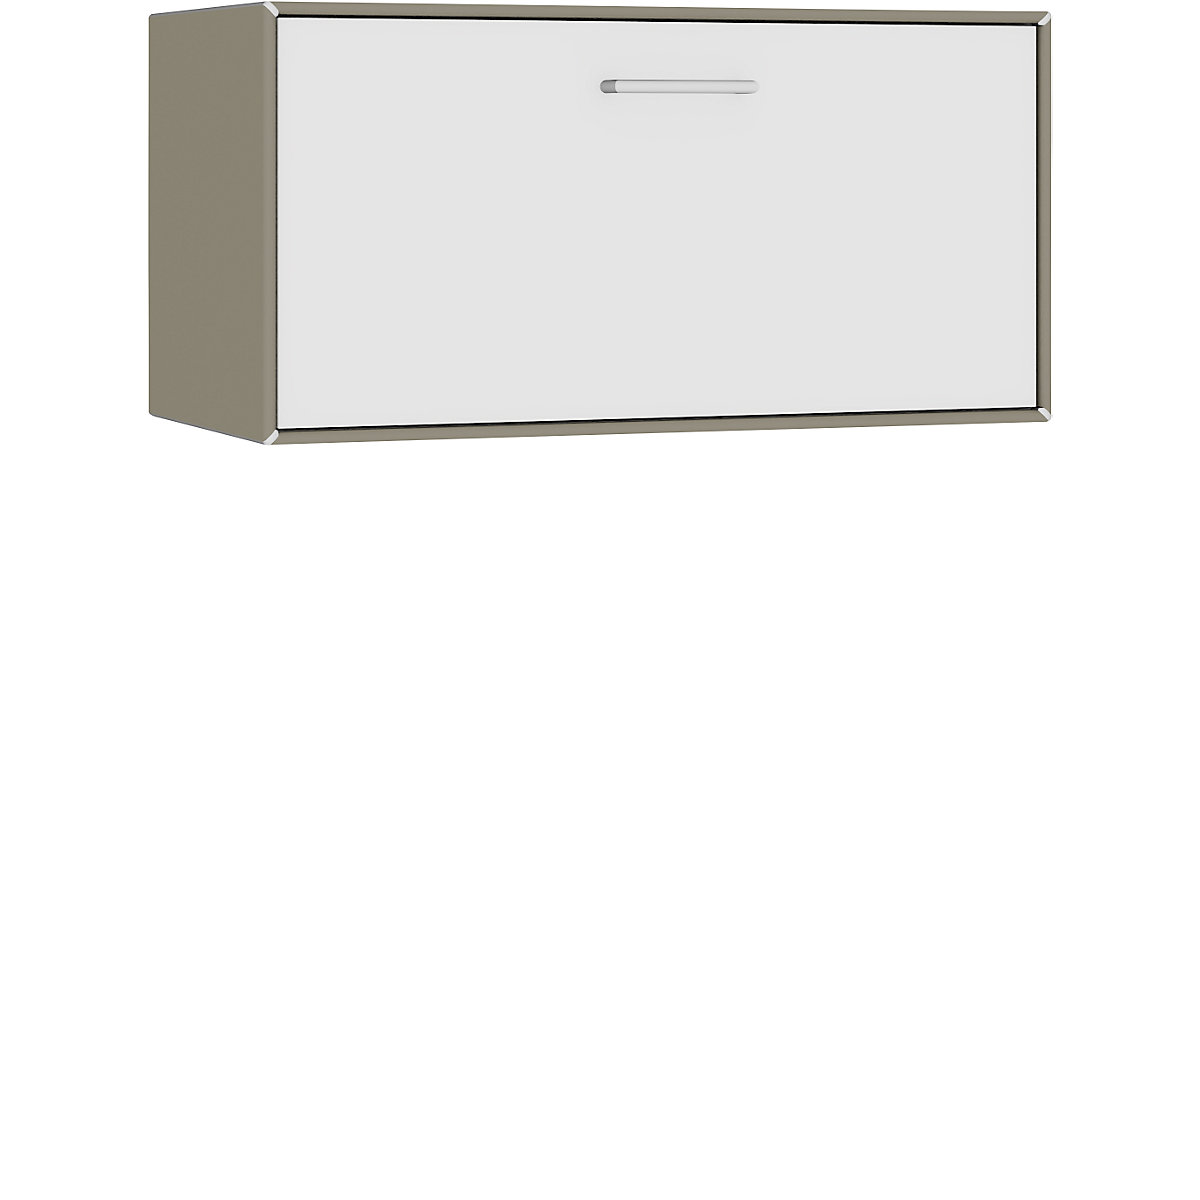 Single box, suspended – mauser, 1 bar cabinet drop-down tray, width 770 mm, beige grey / pure white-2